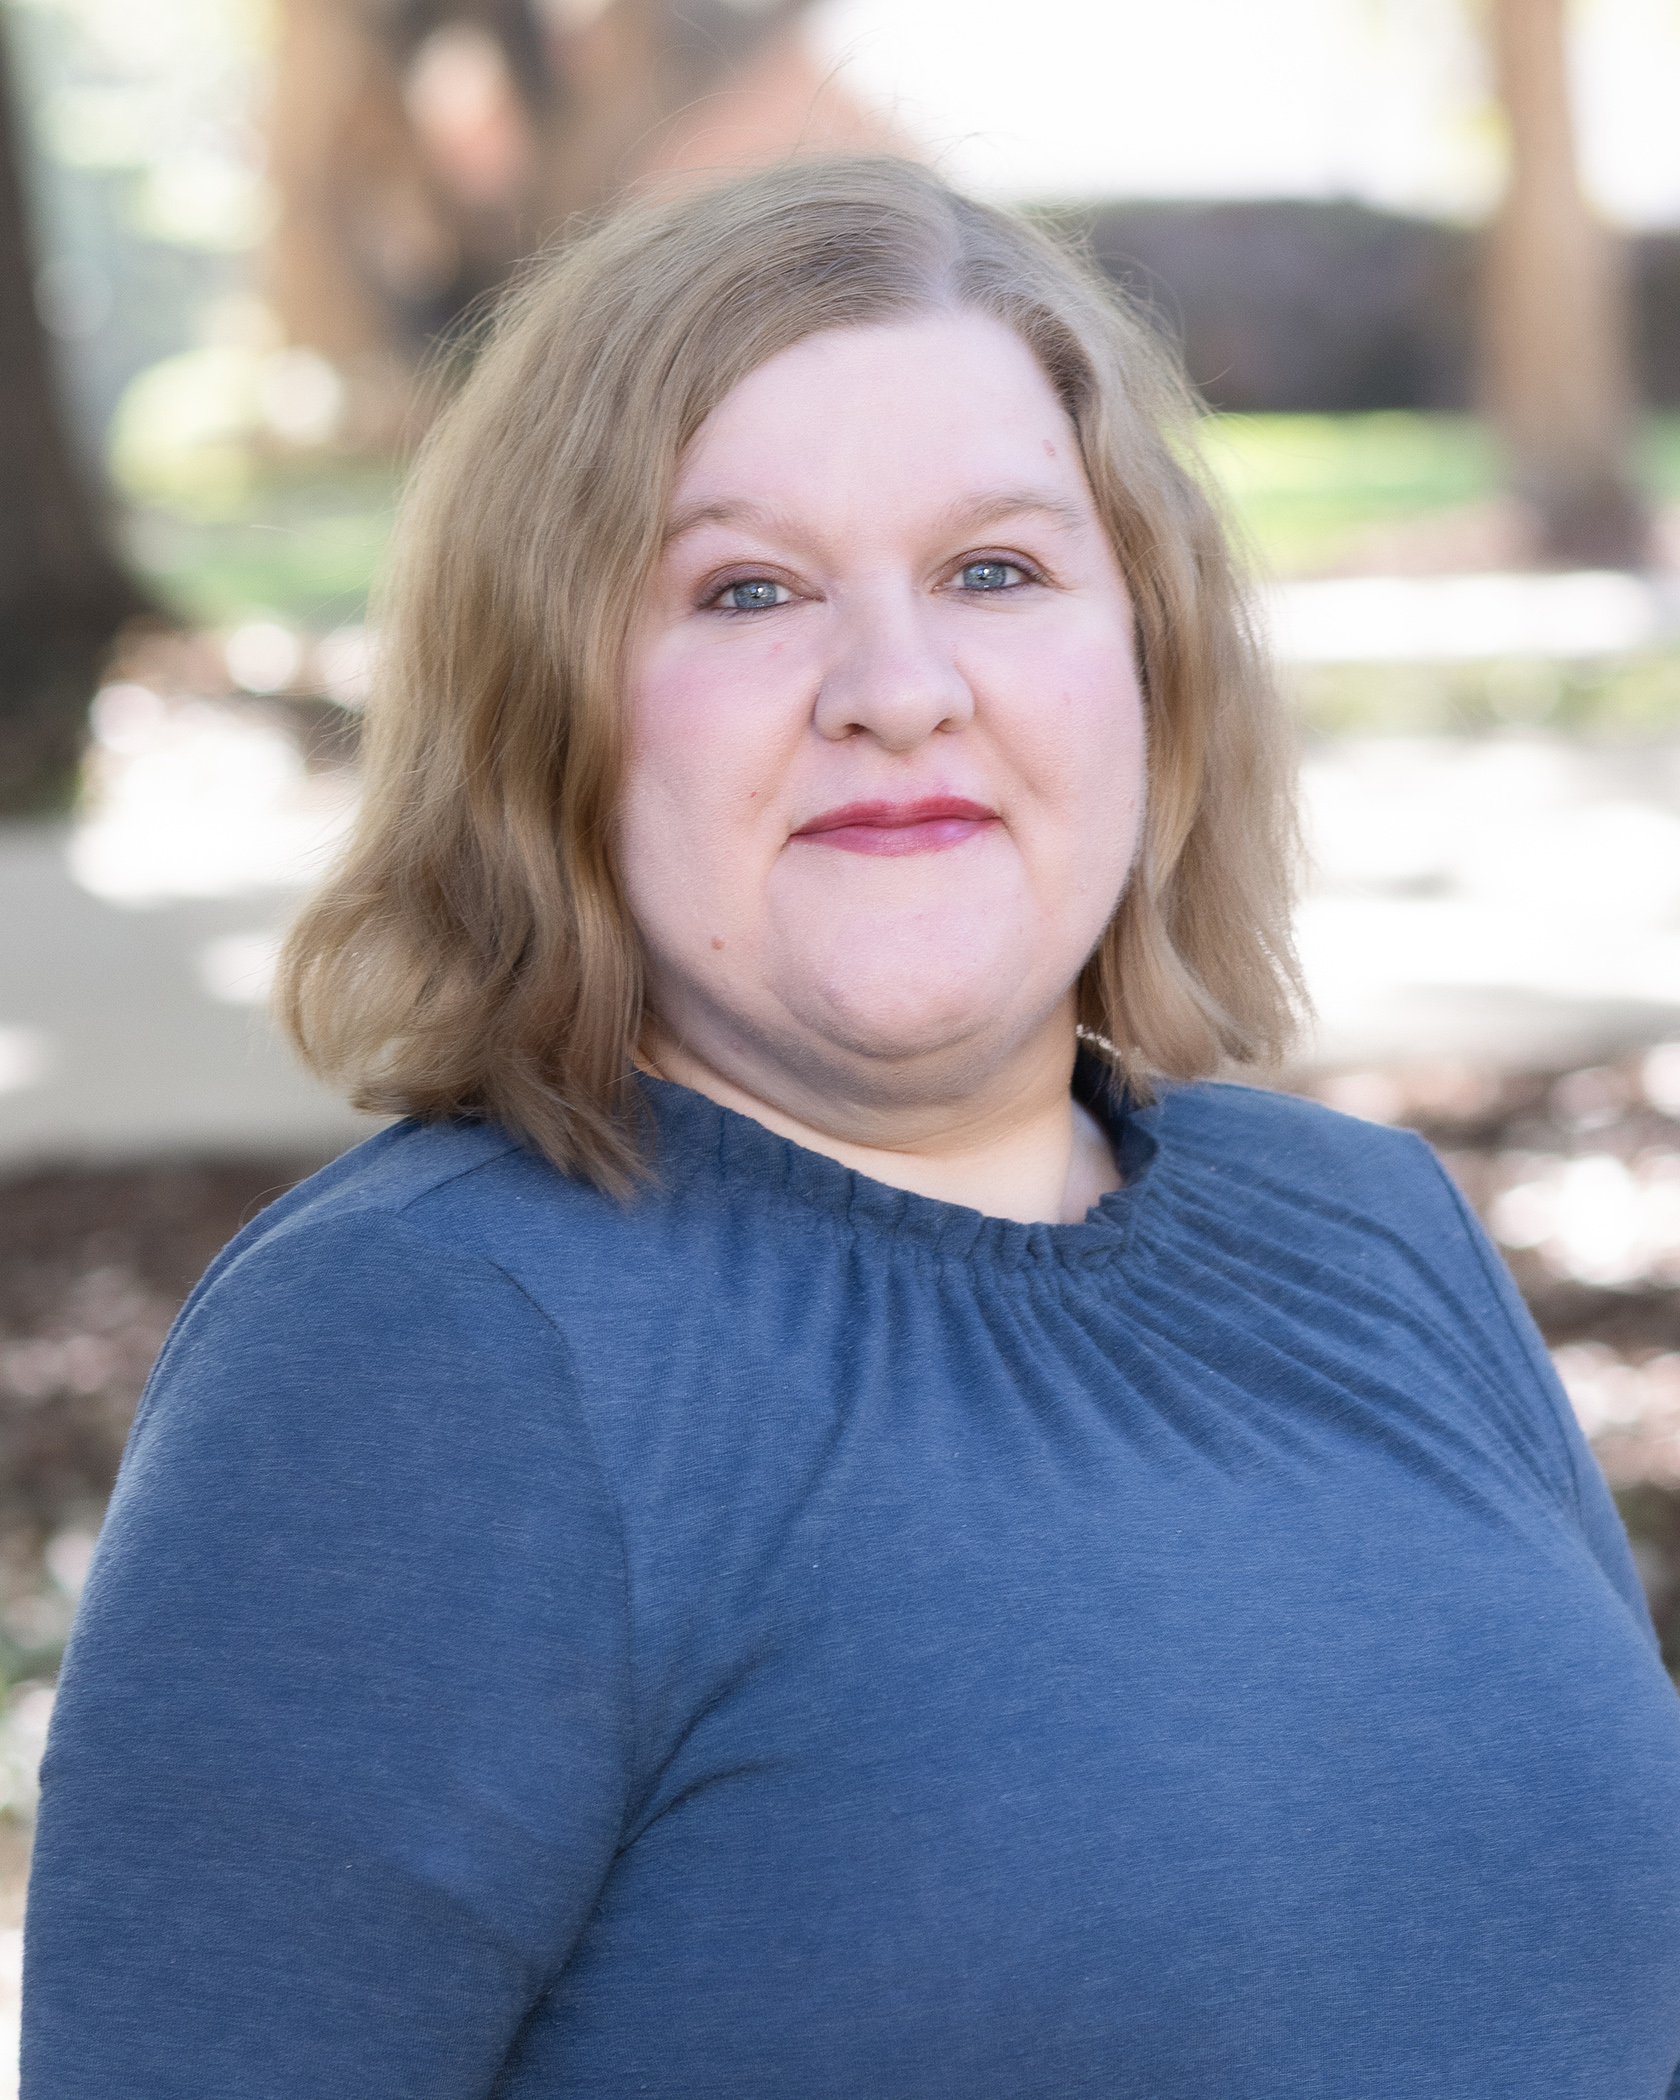 Elizabeth Hussa is the Chair of the Biology department and and associate professor at Millsaps College.